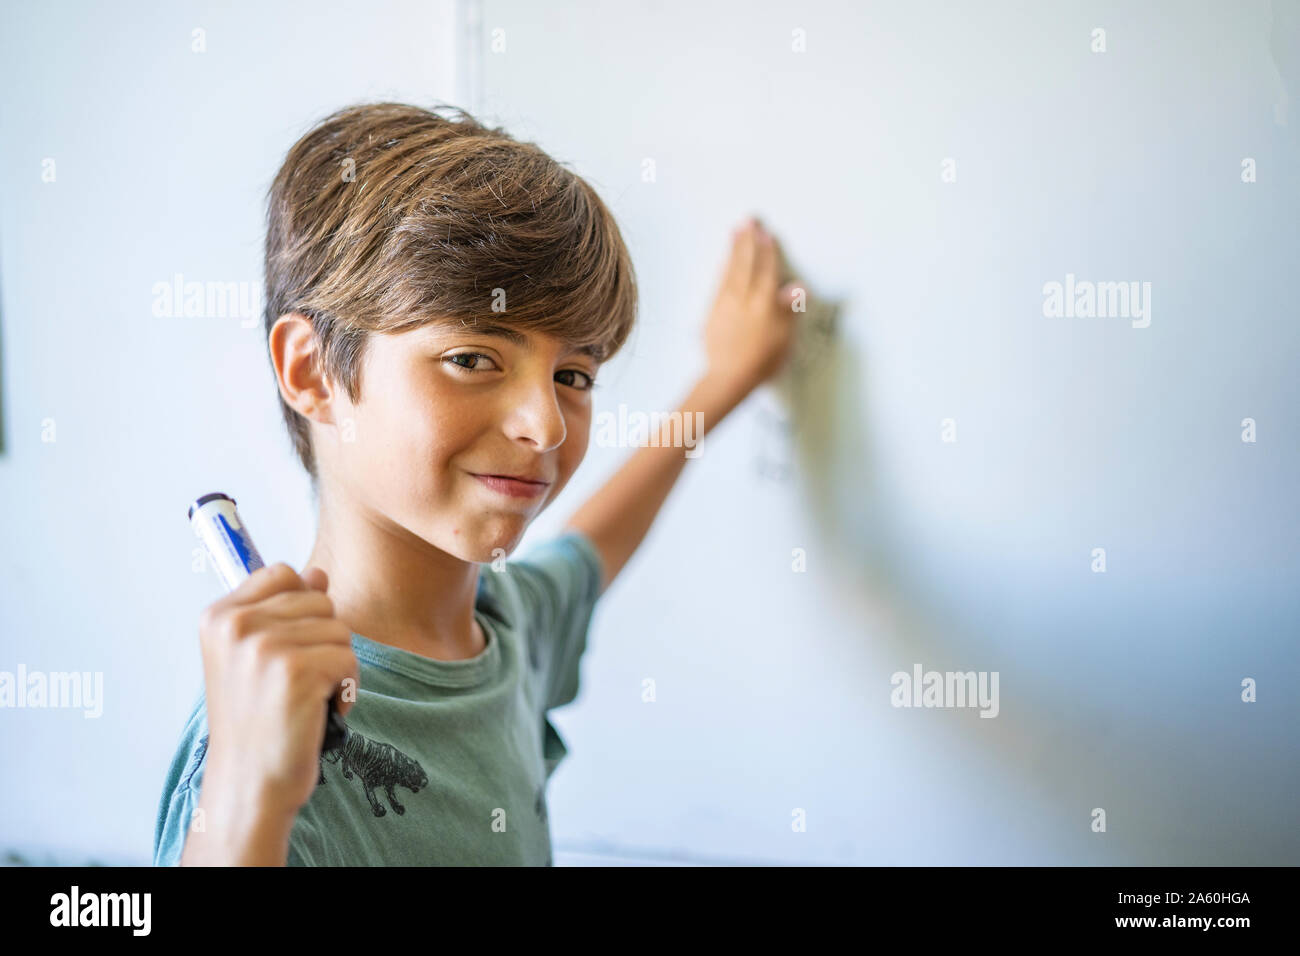 Portrait of confident boy in front of a whiteboard Stock Photo